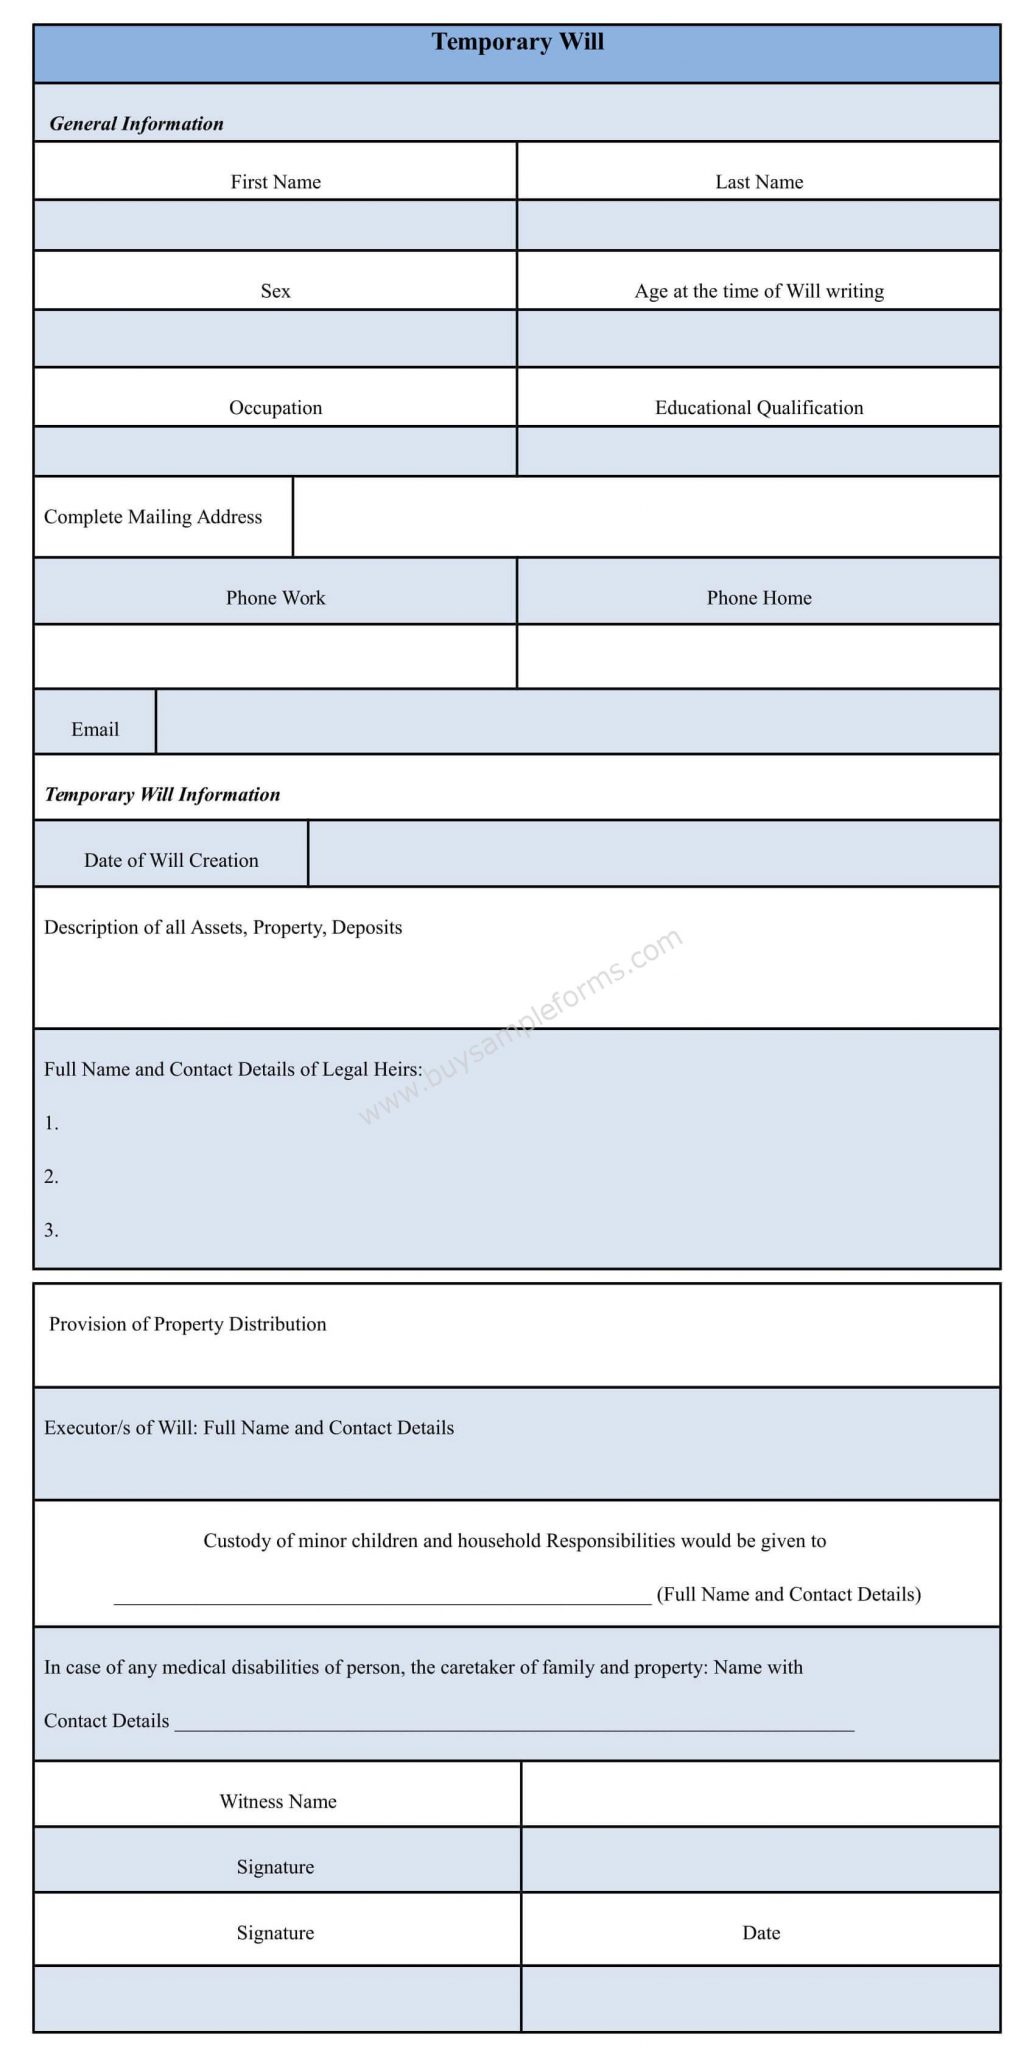 Temporary Will Form Sample Template